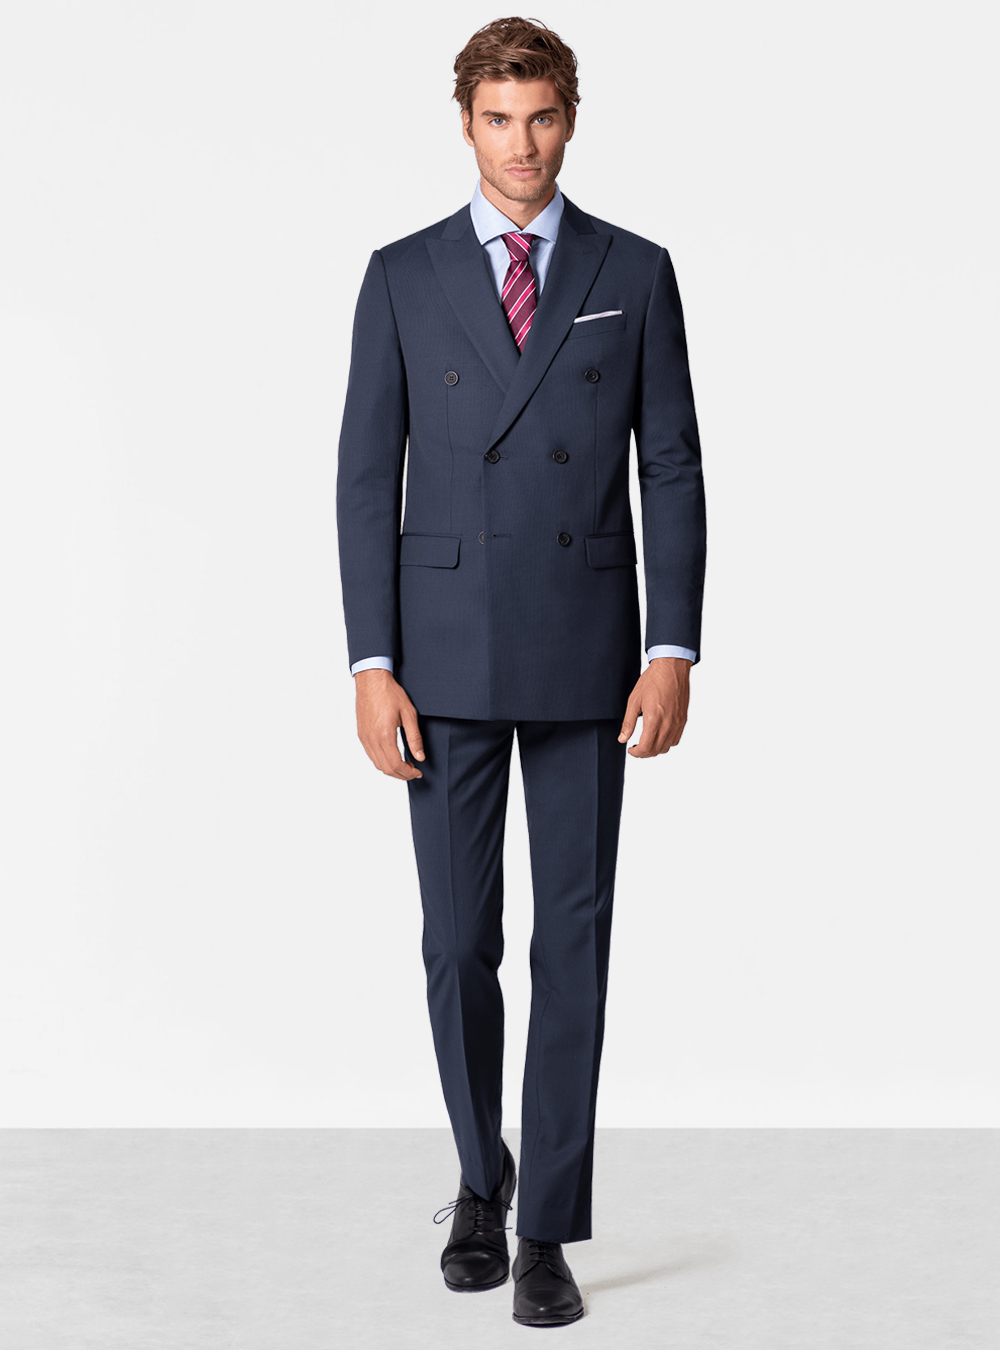 Blue double-breasted suit, light blue dress shirt, purple tie and black derby shoes